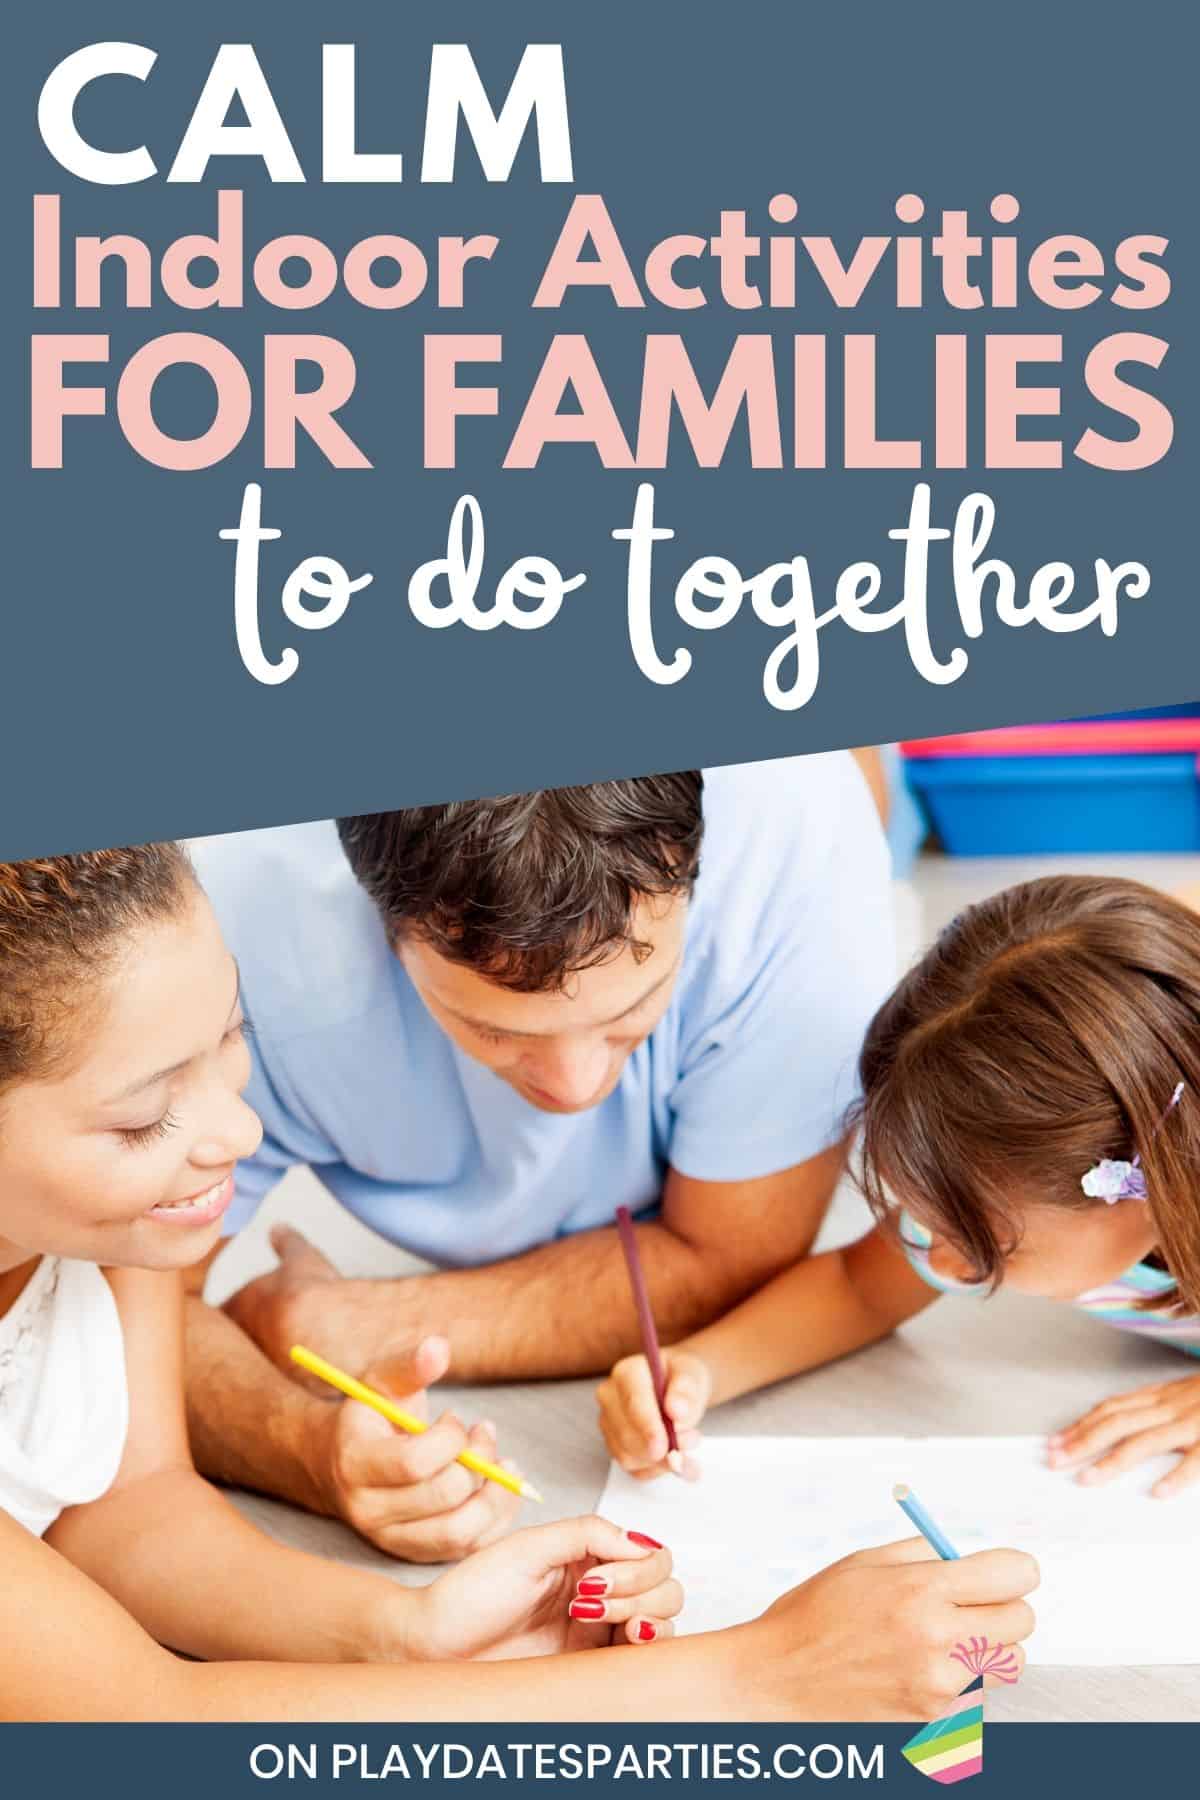 A family coloring a page together with text overlay calm indoor activities for families to do together.